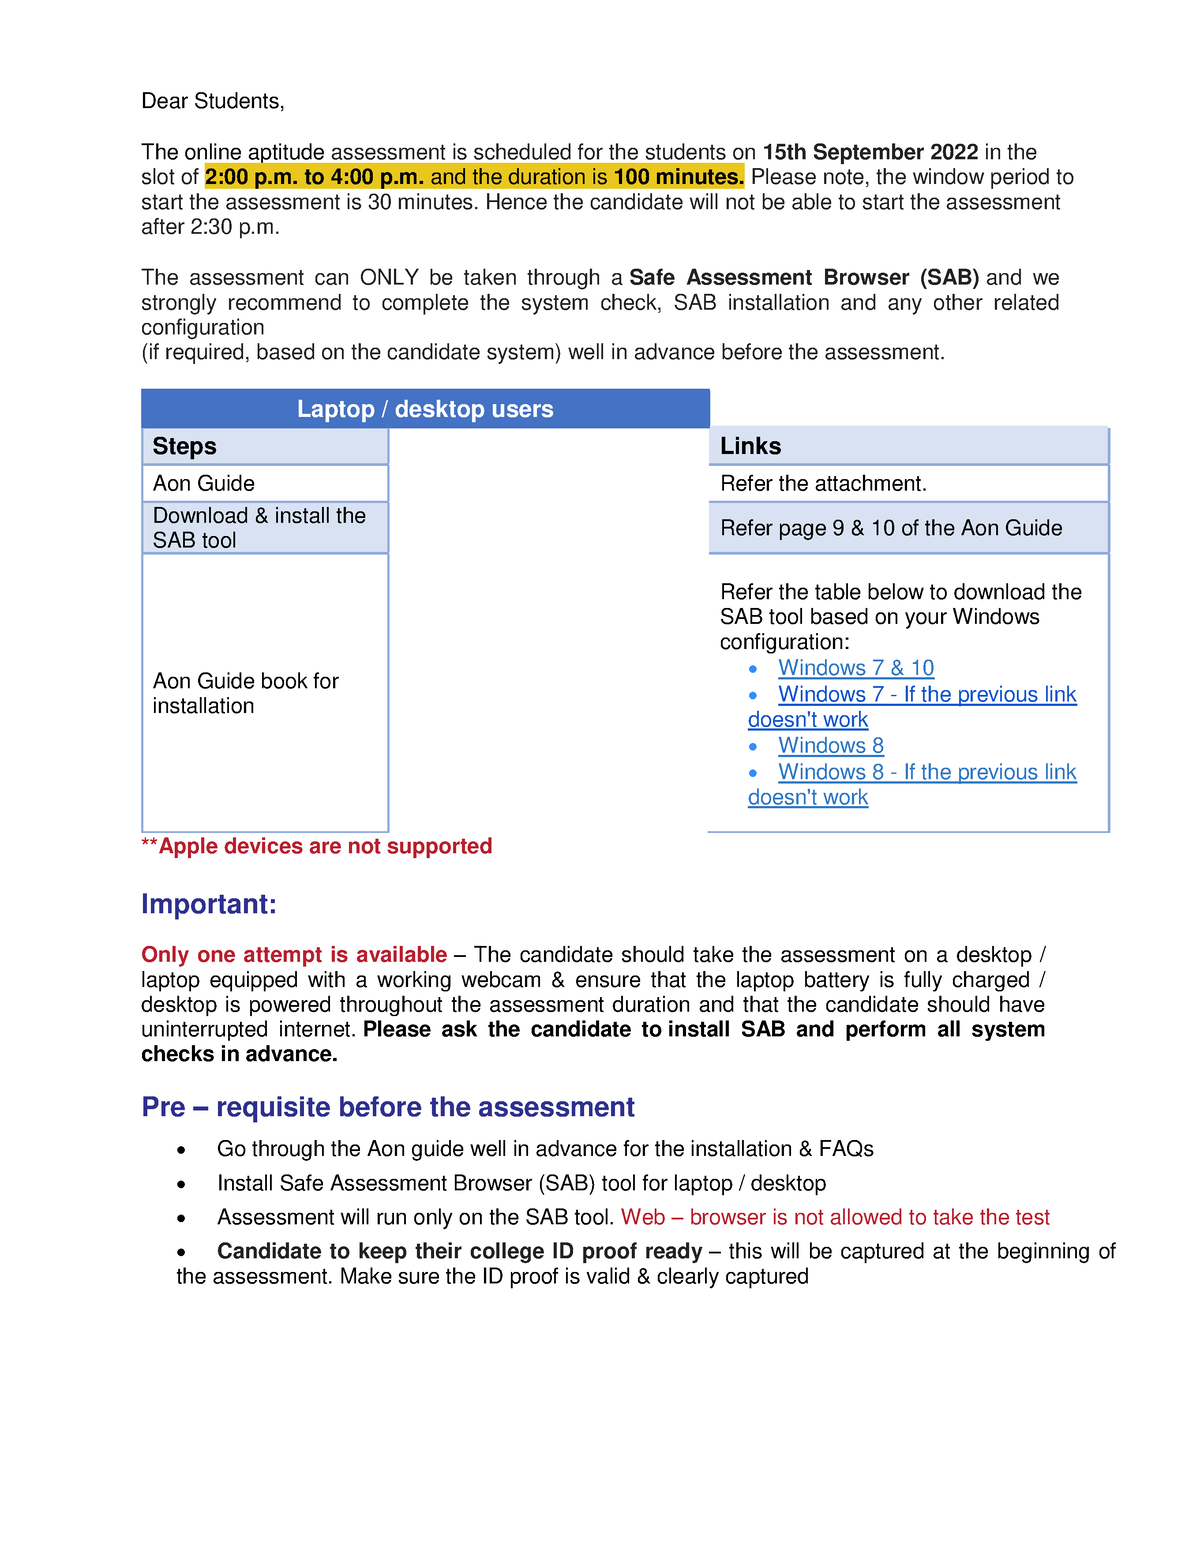 cognizant-aptitude-test-dear-students-the-online-aptitude-assessment-is-scheduled-for-the